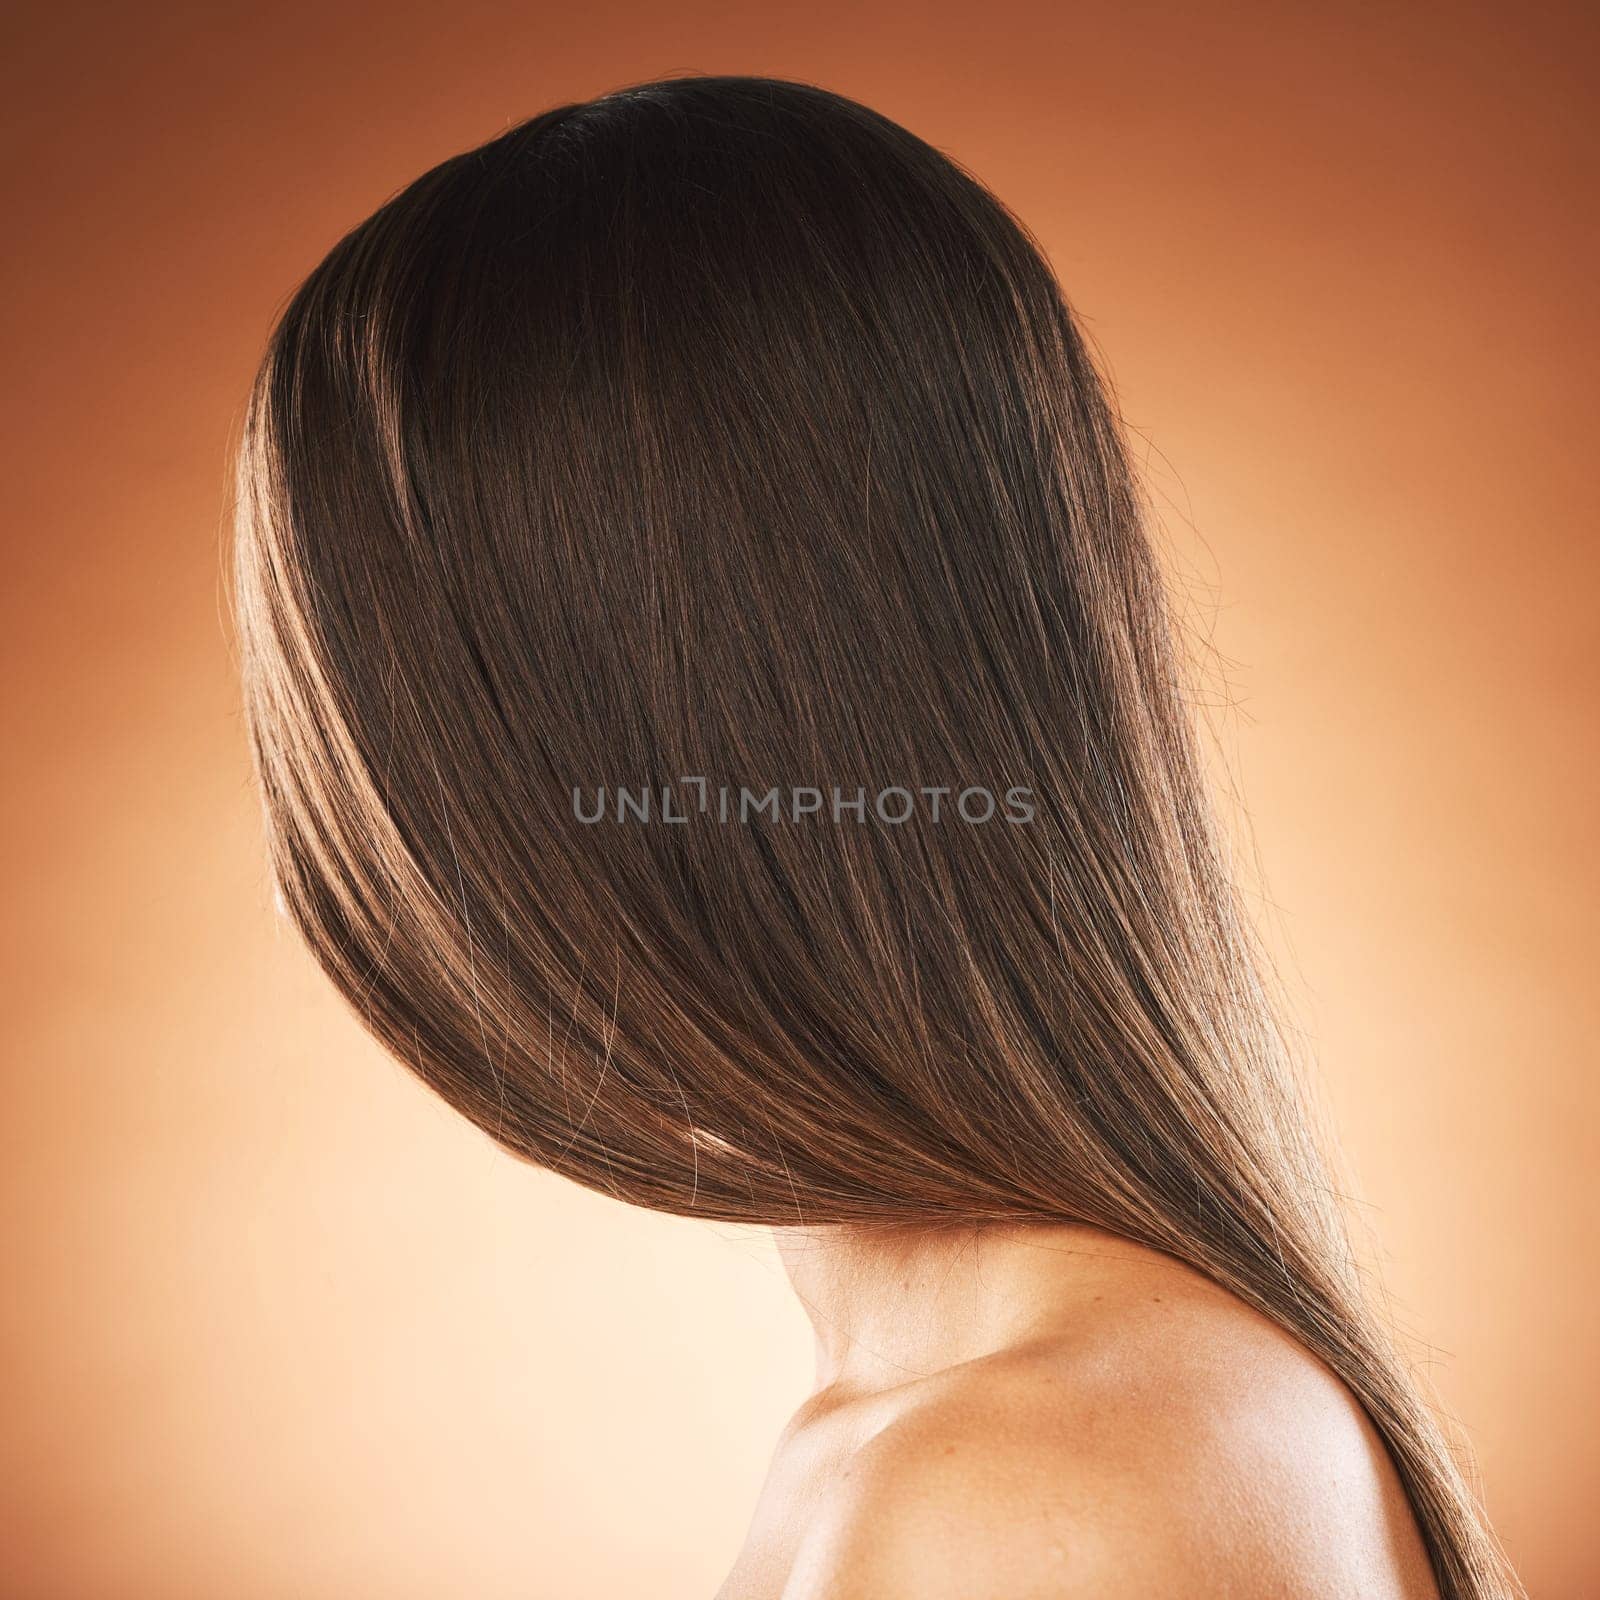 Woman, texture or hair style on orange studio background in keratin treatment marketing, Brazilian straightening advertising or self care. Model headshot, brunette color aesthetic or mockup backdrop by YuriArcurs